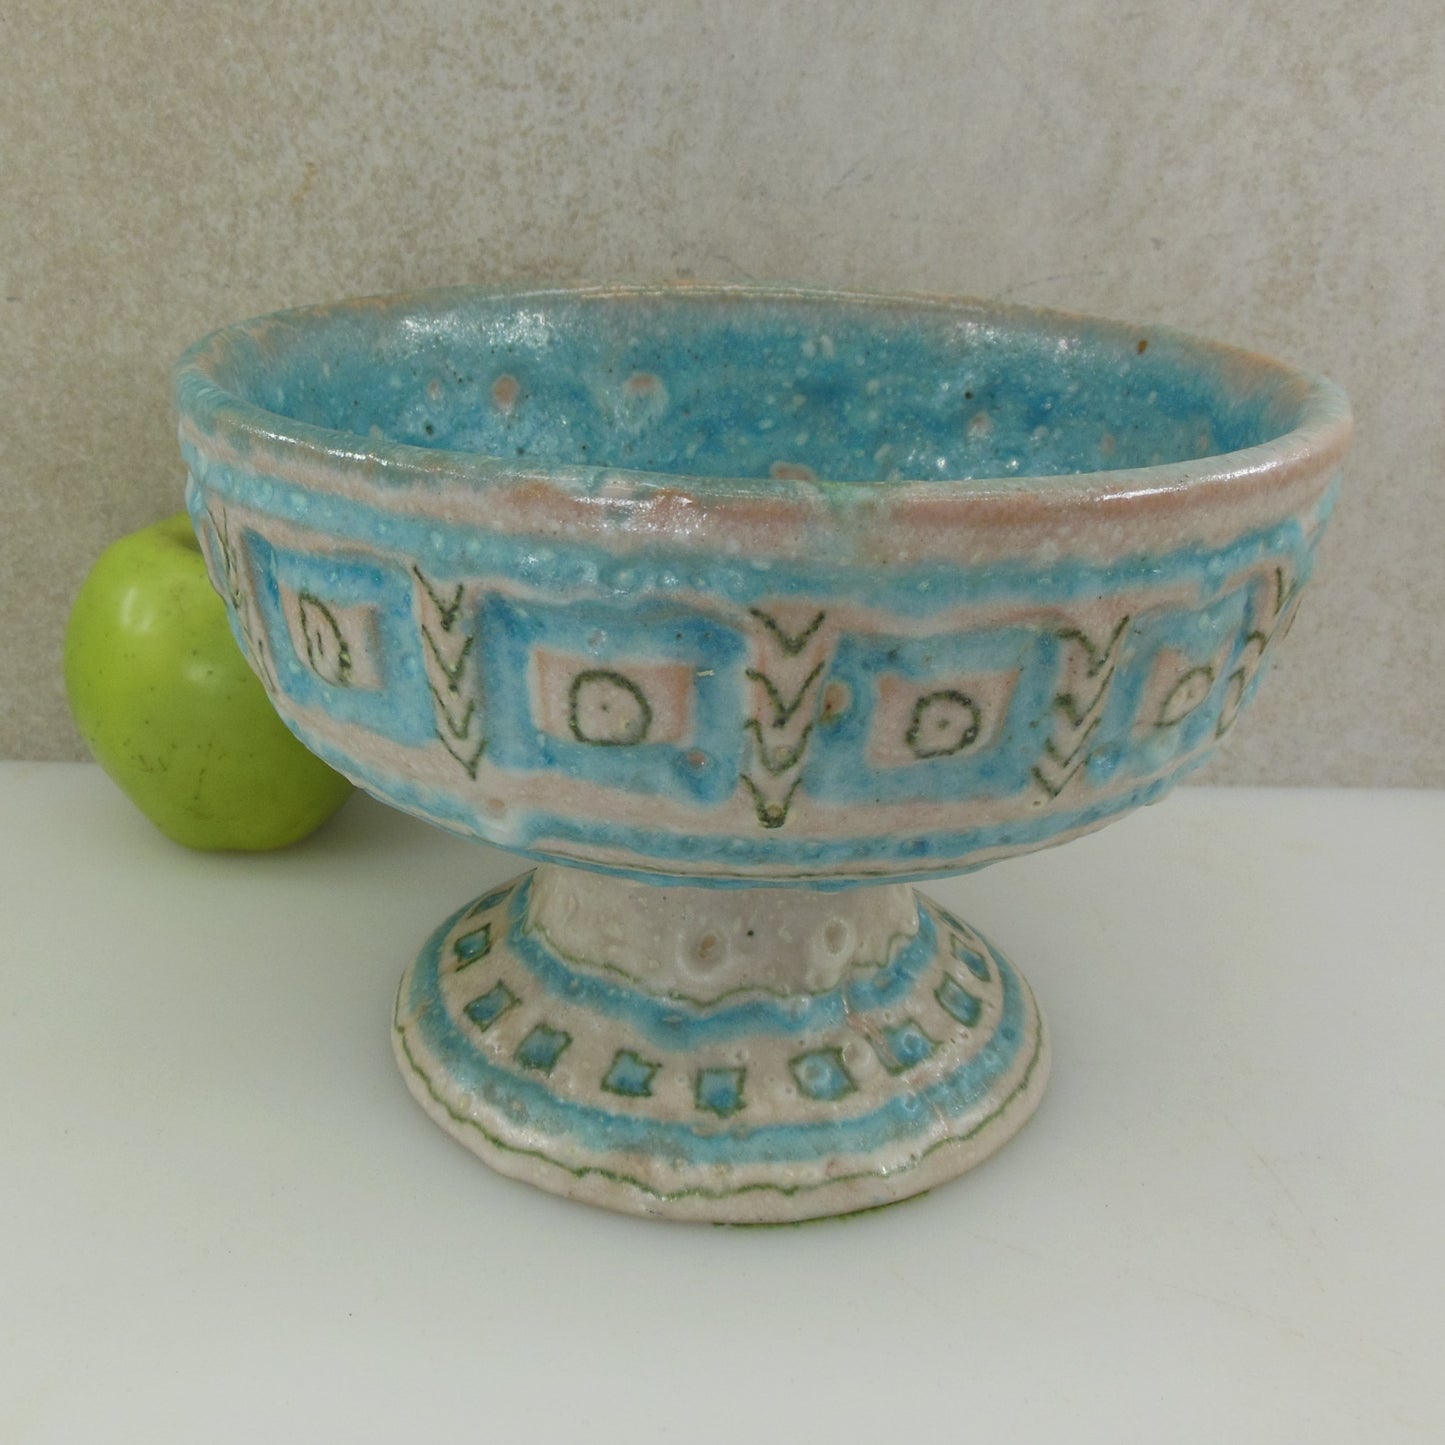 Guido Gambone Italy Pottery Pedestal Centerpiece Bowl Compote Turquoise Green